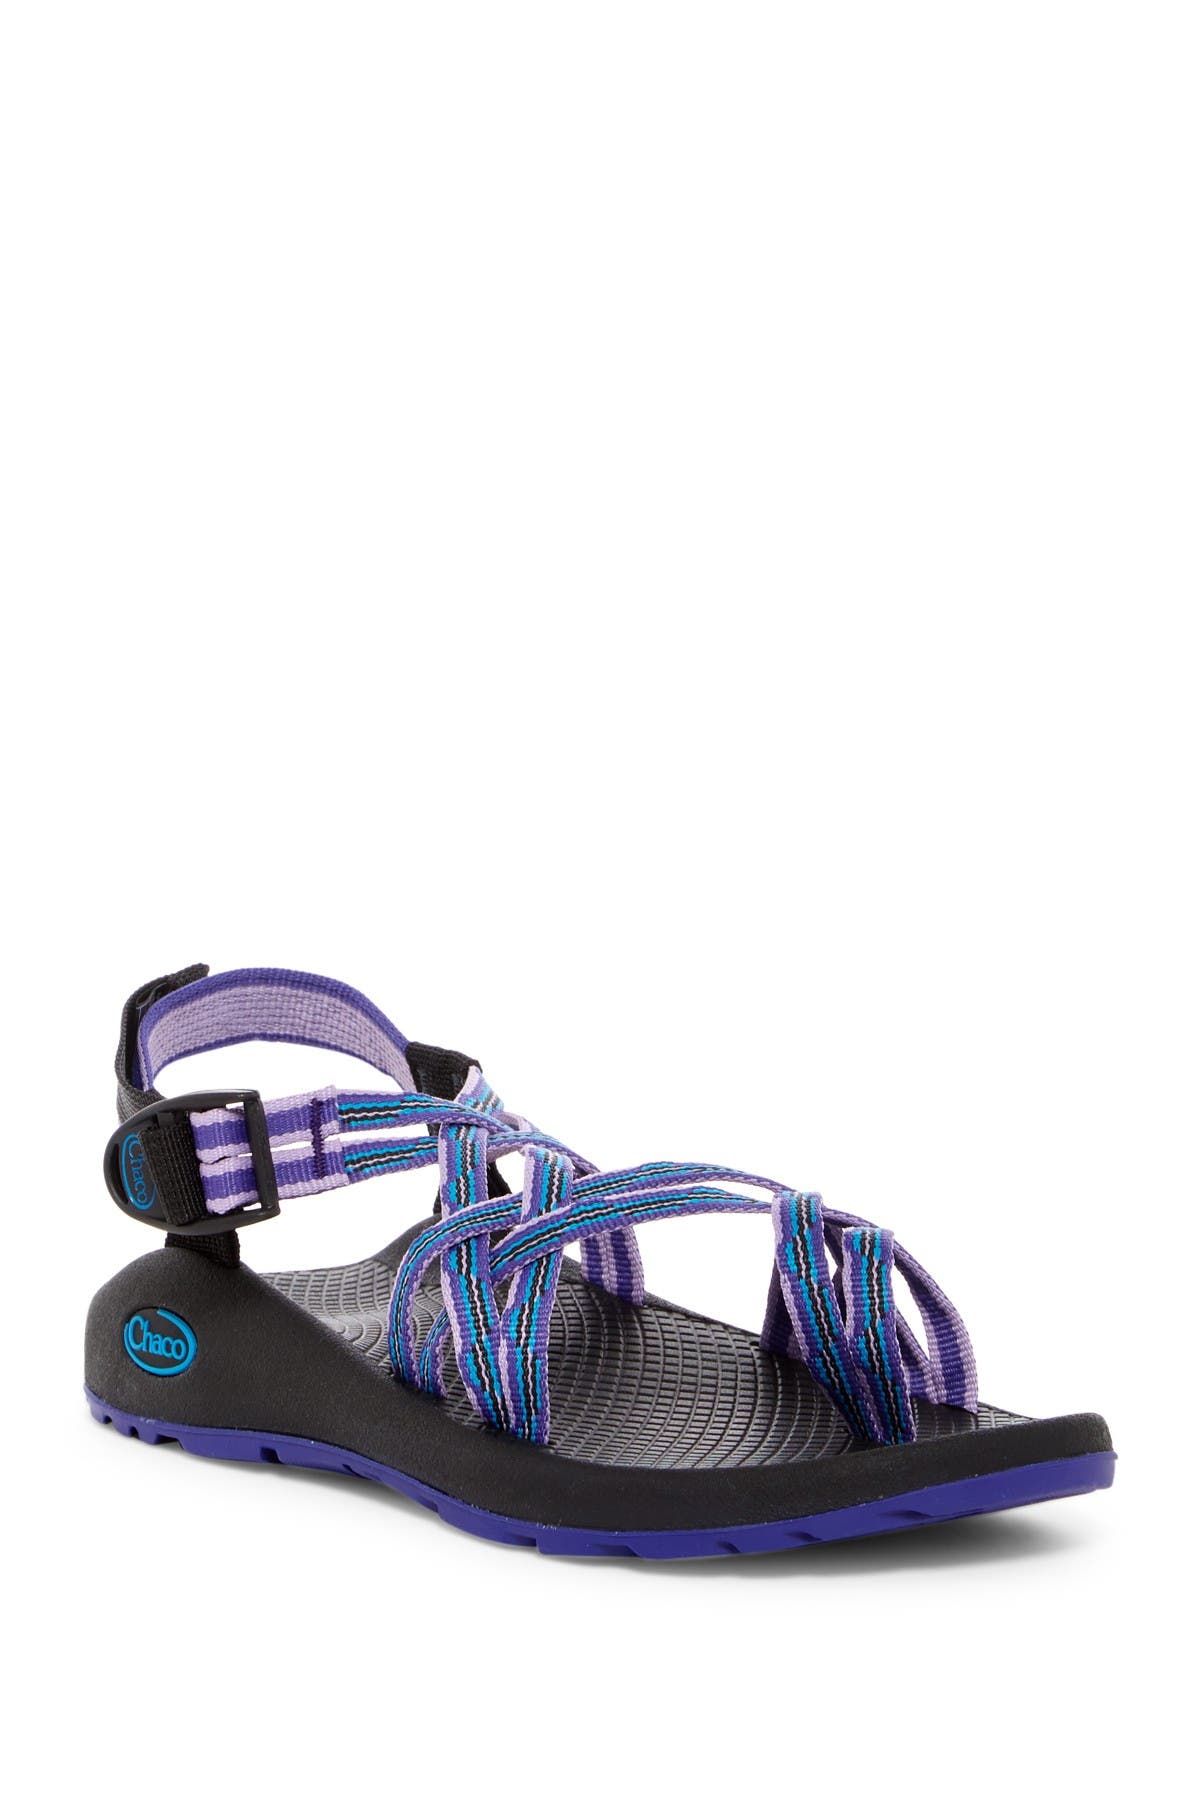 chacos zx2